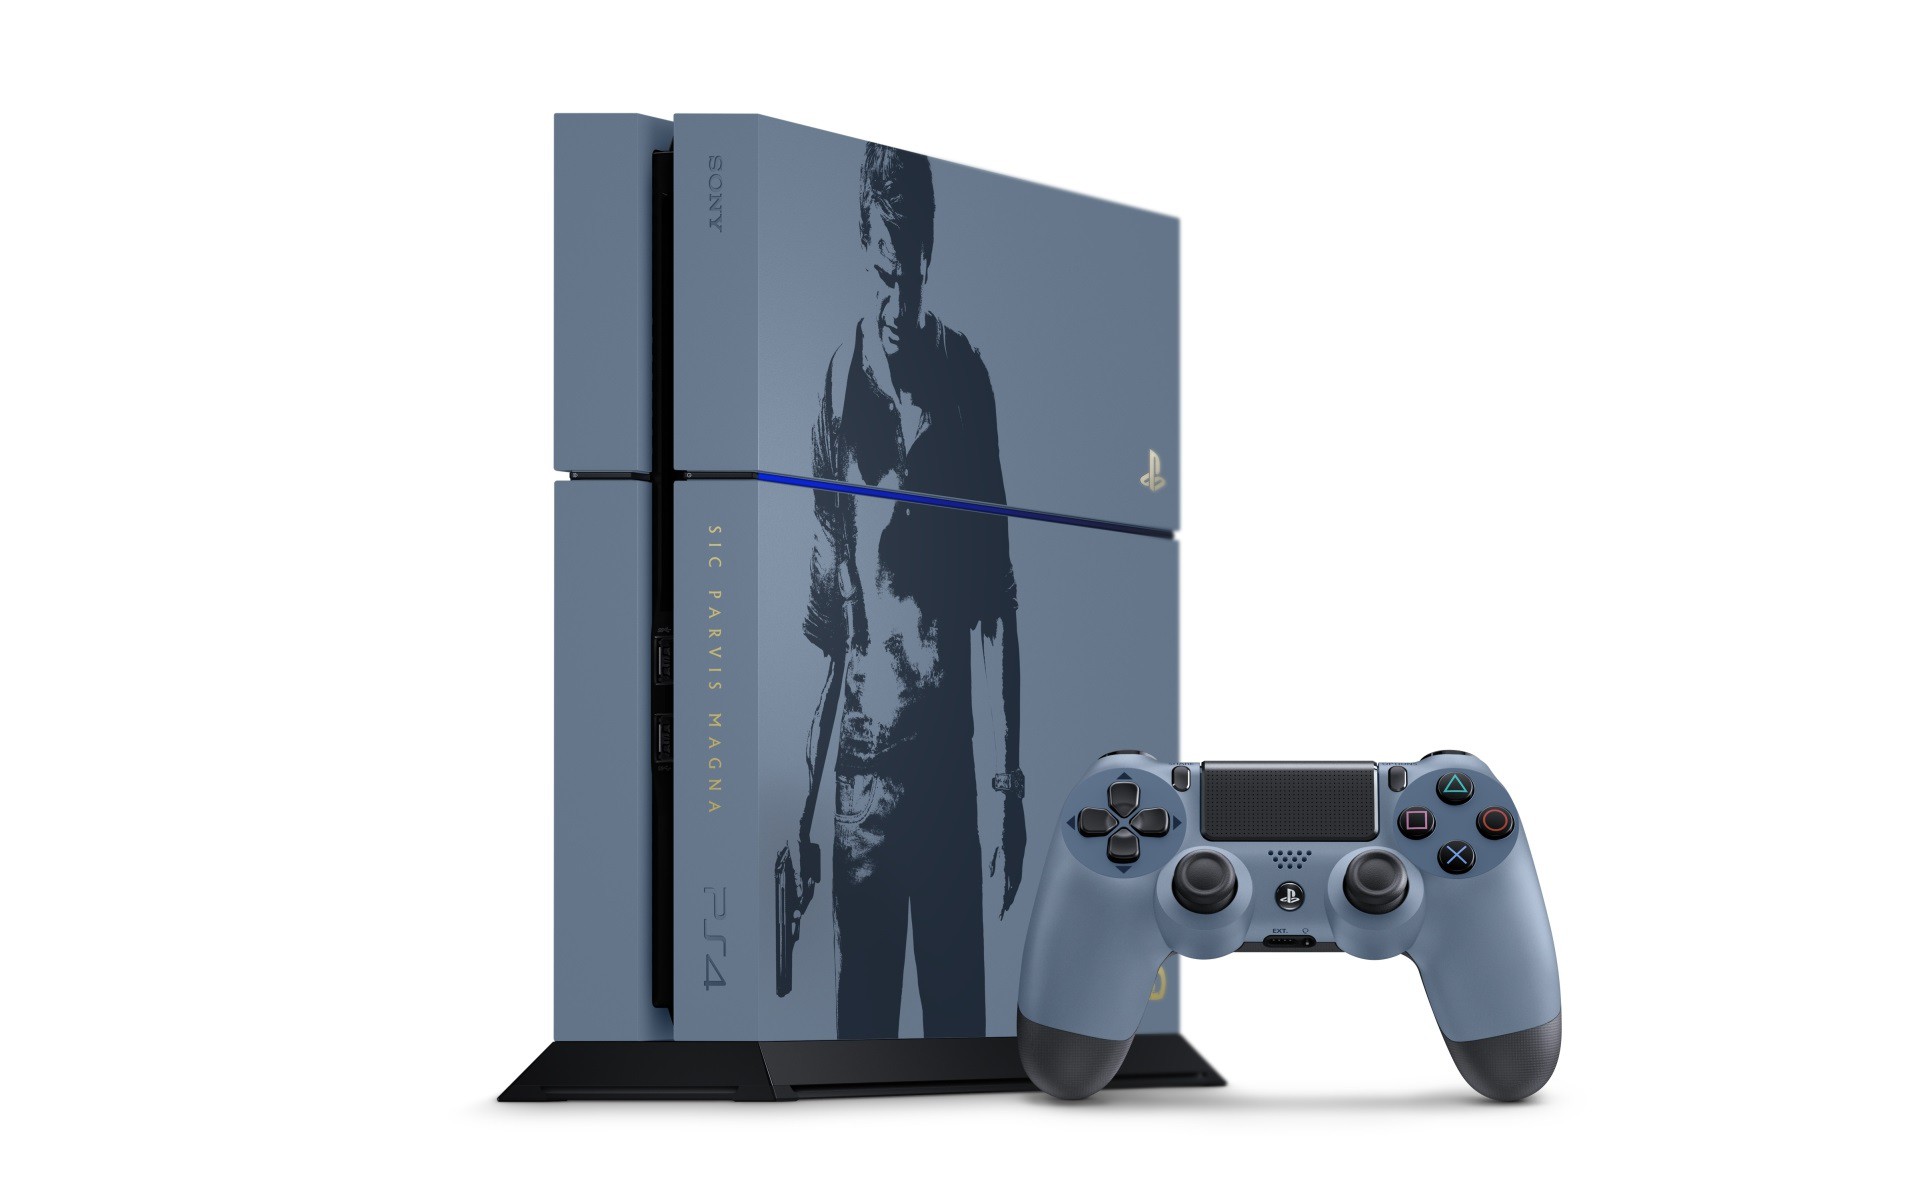 Ps4 ремонтundefined. Ps4 Uncharted 4 Limited. Ps4 Uncharted 4 Limited Edition. Uncharted 4 ps4. PLAYSTATION 4 Uncharted Edition.